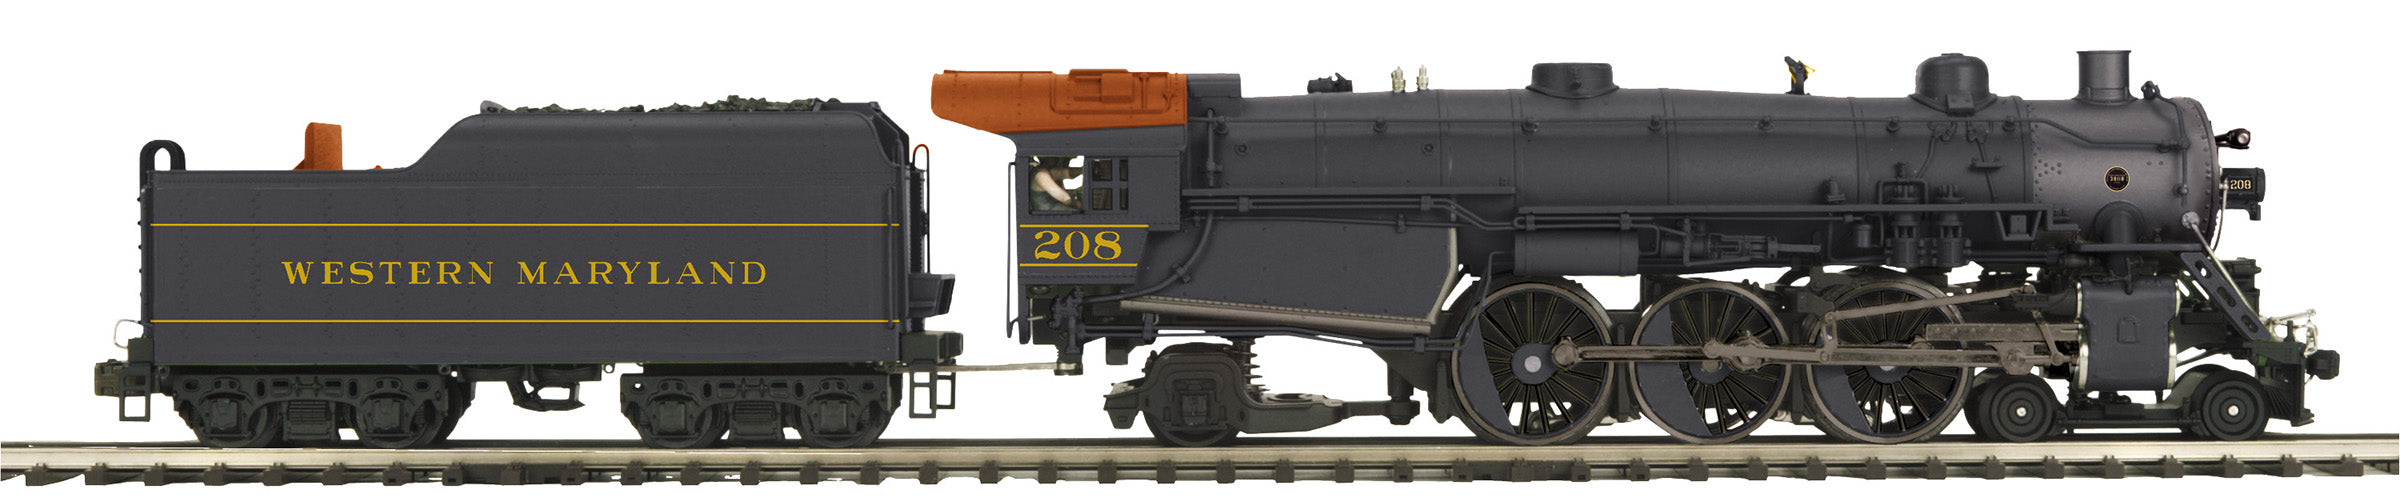 MTH 20-3933-1 - 4-6-2 P47 Baldwin Pacific Steam Engine "Western Maryland" #208 w/ PS3